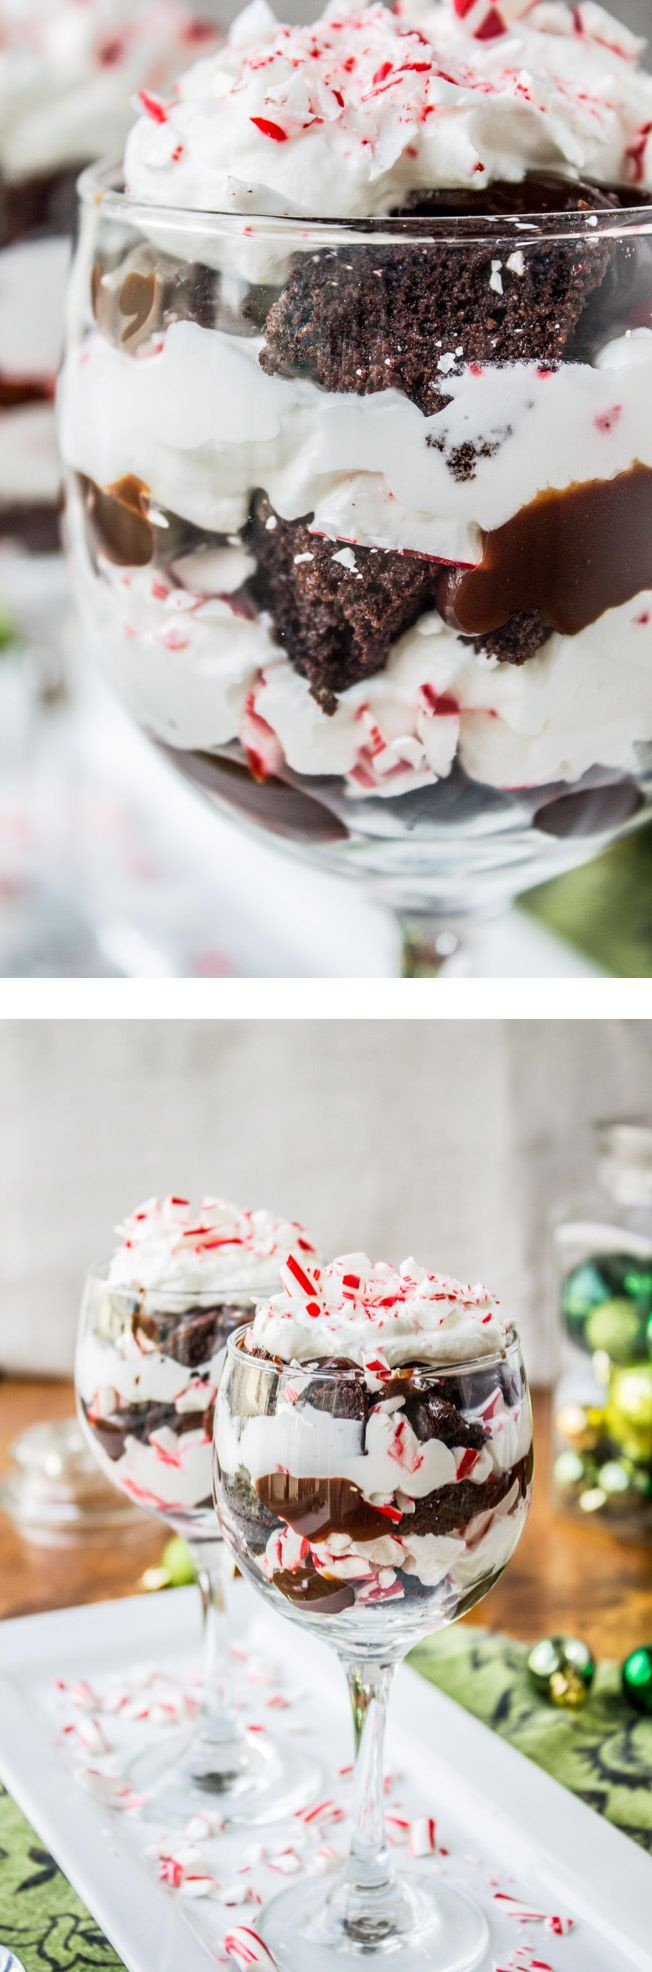 Chocolate Christmas Desserts Easy
 16 Awesome Christmas Day Dessert Recipes